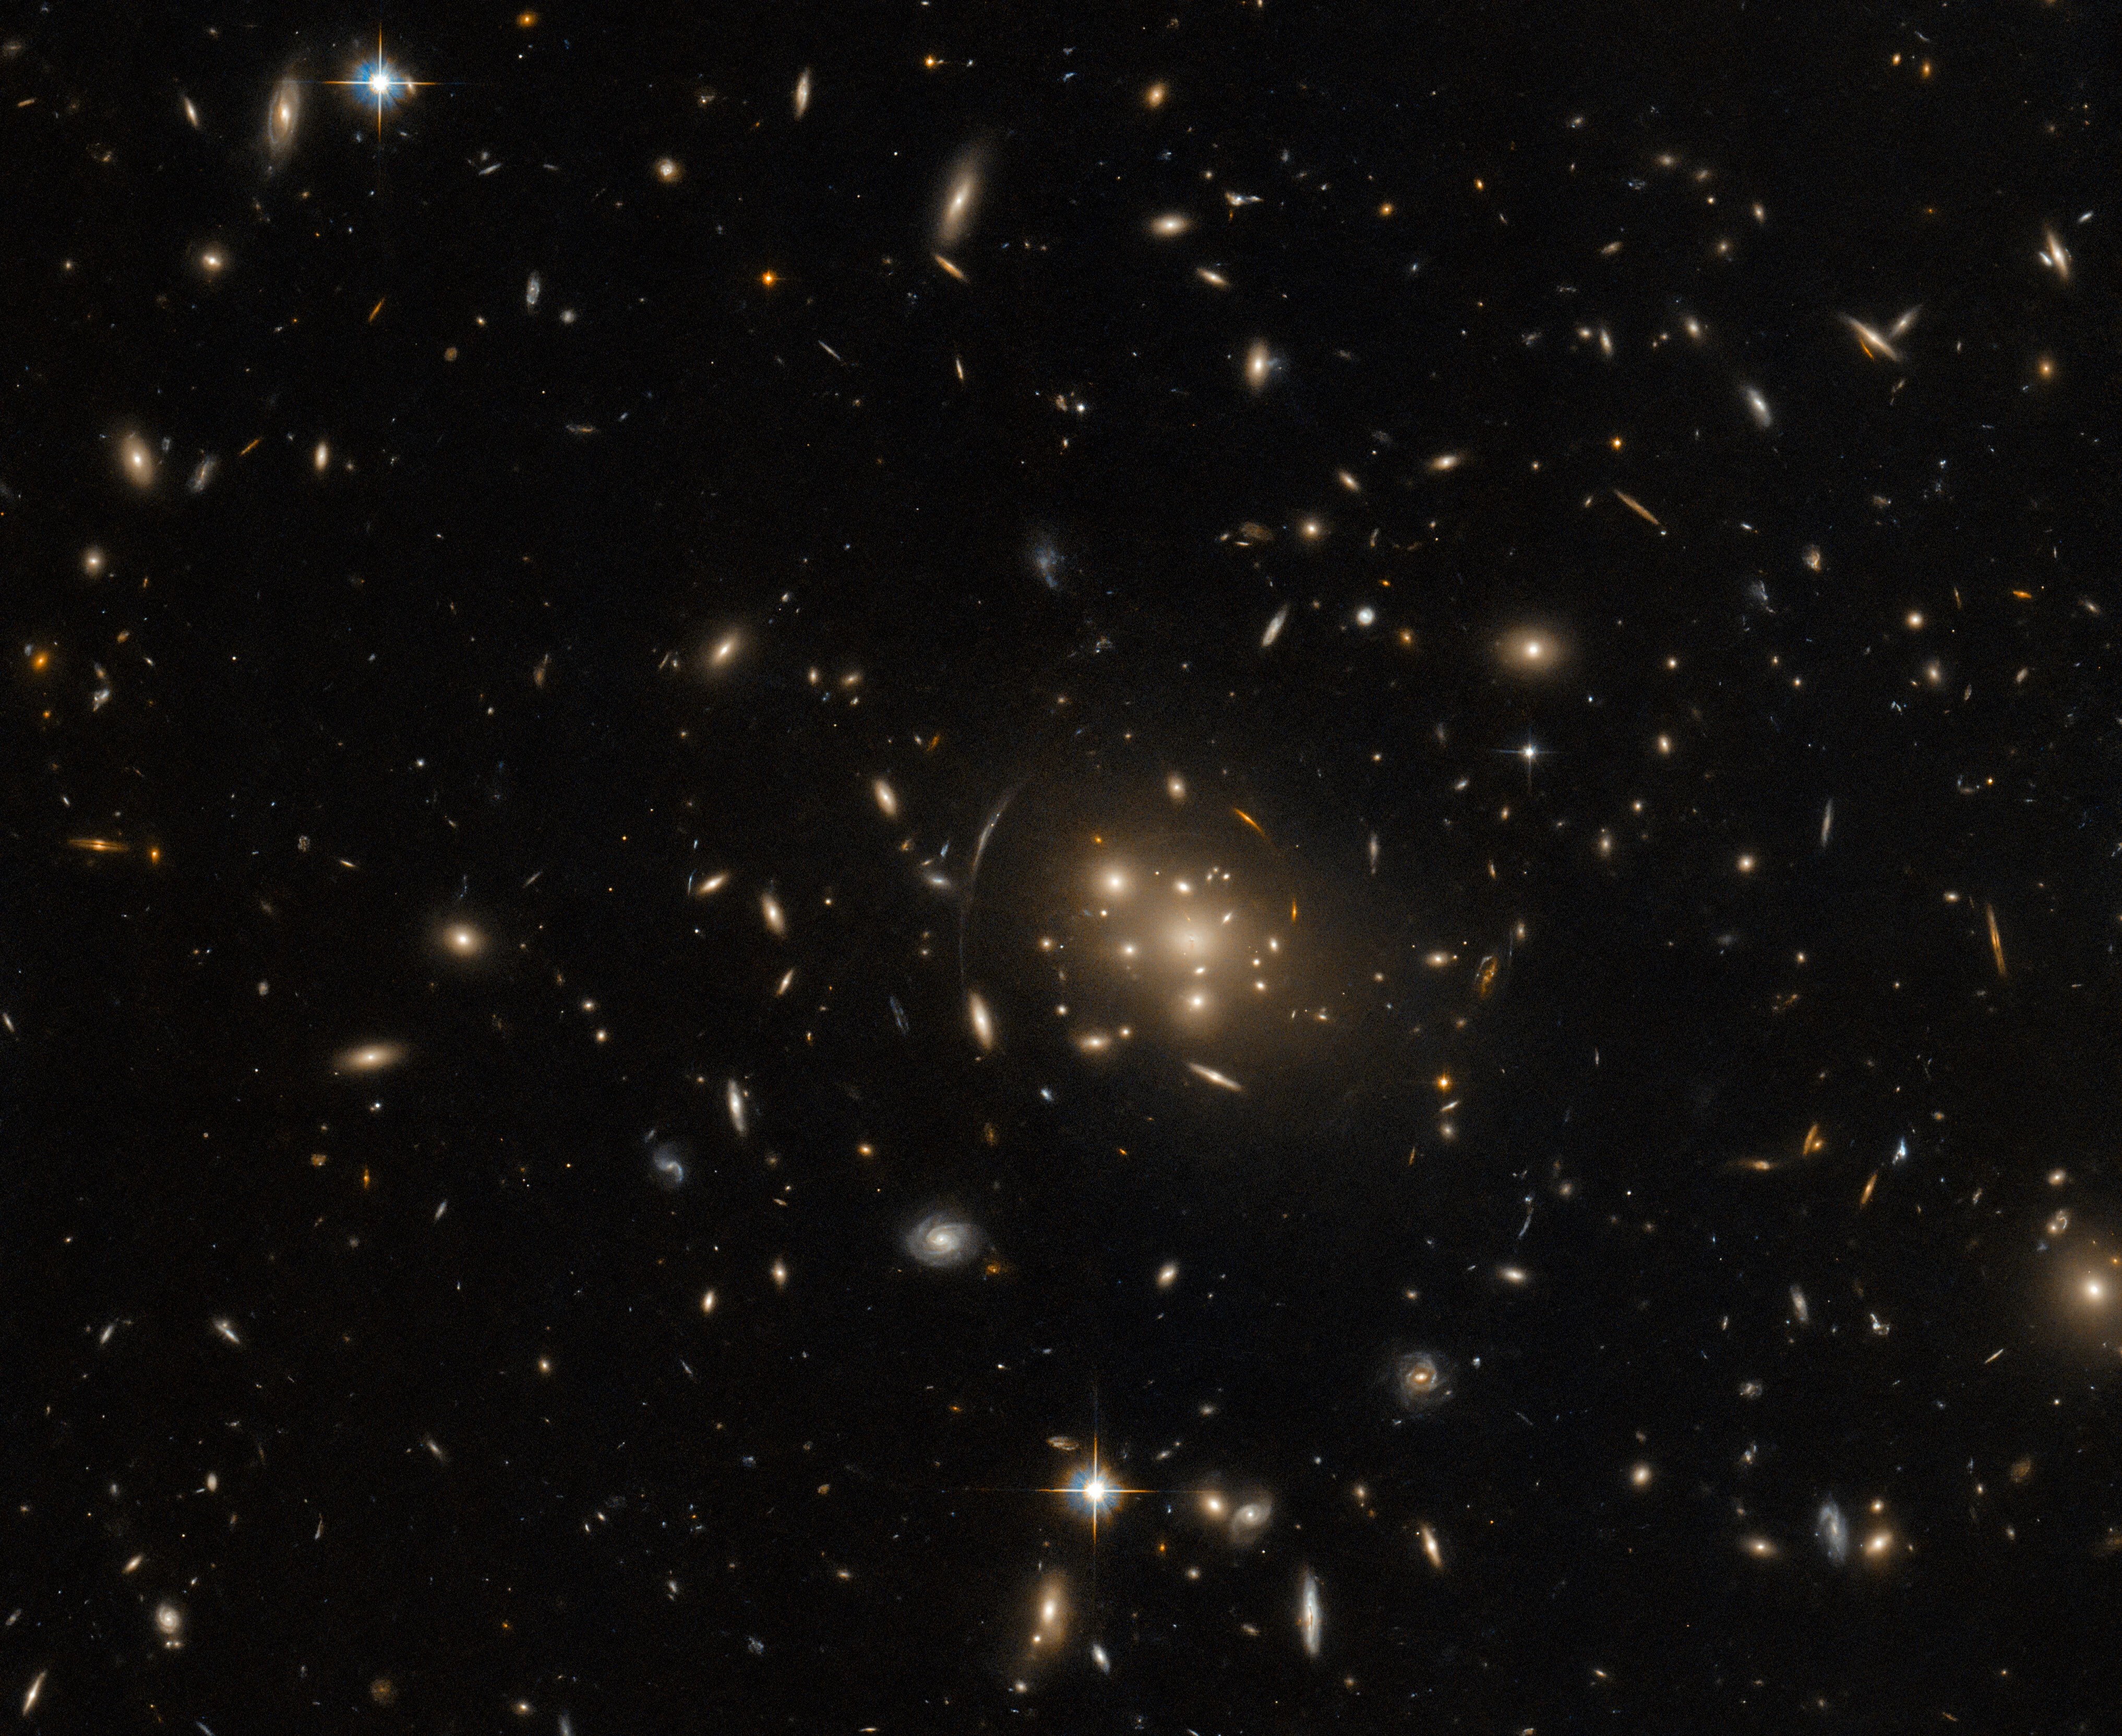 A cluster of large galaxies, surrounded by various stars and smaller galaxies on a dark background. The central cluster is mostly made of bright elliptical galaxies that are surrounded by a warm glow. Nearby the cluster is the stretched, distorted arc of a galaxy, gravitationally lensed by the cluster.